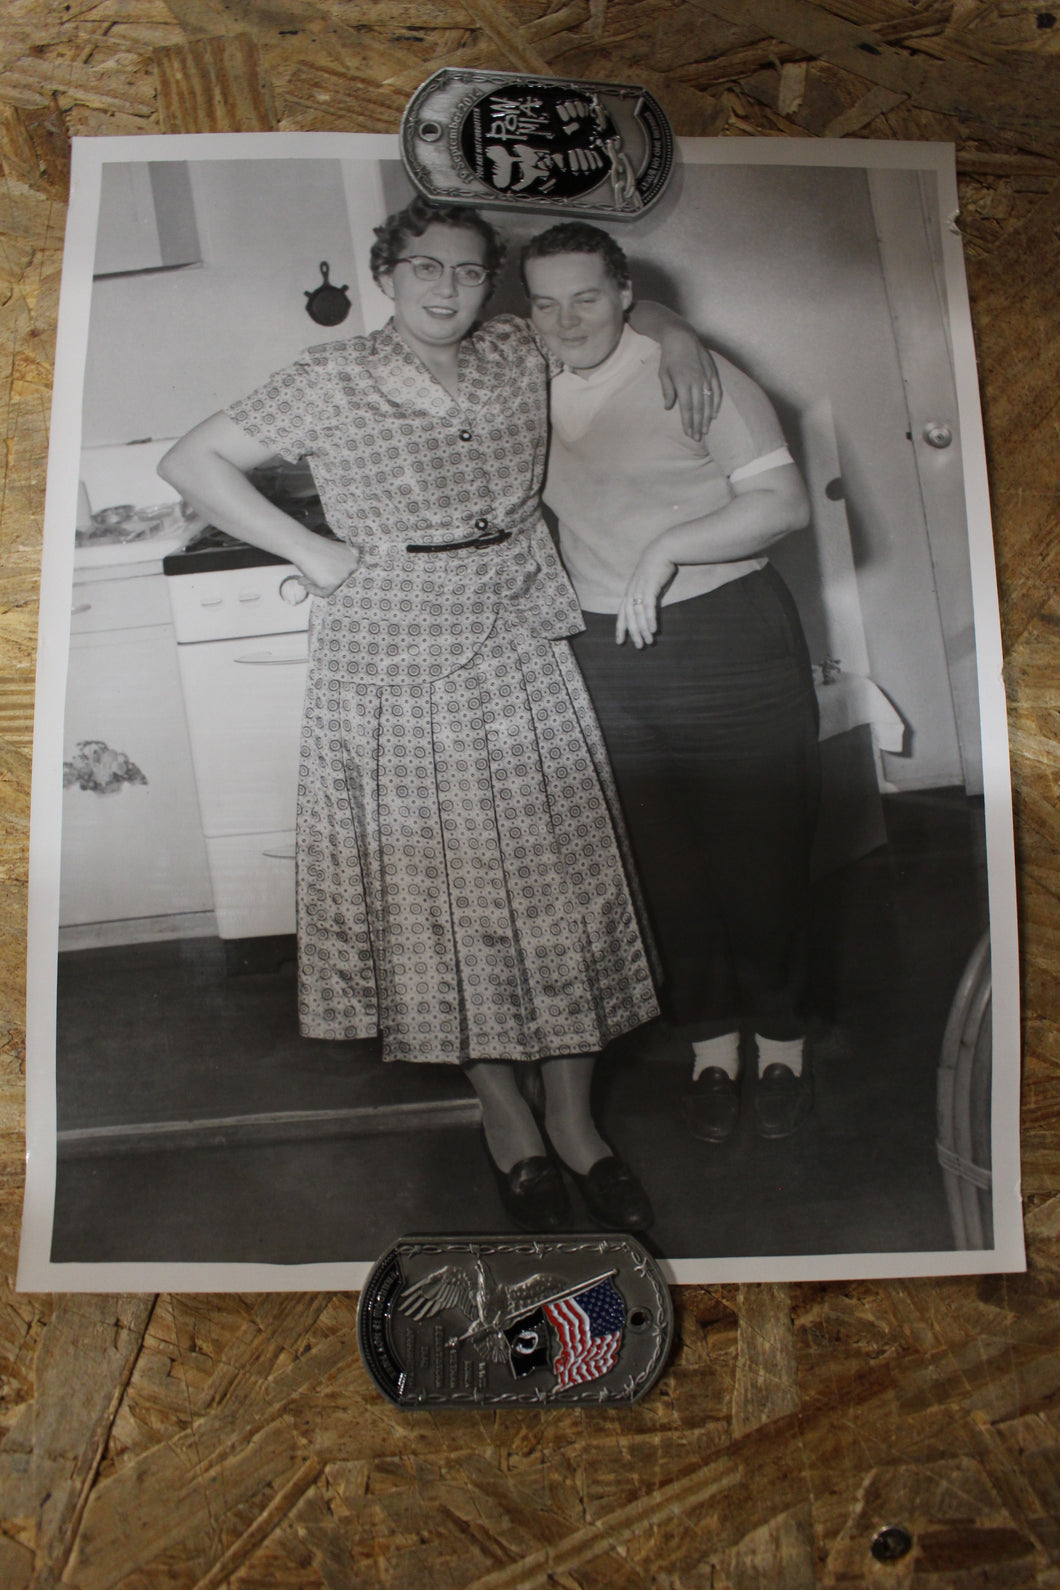 Vintage Authentic and Original Photo Women Posing Together In Kitchen -Used